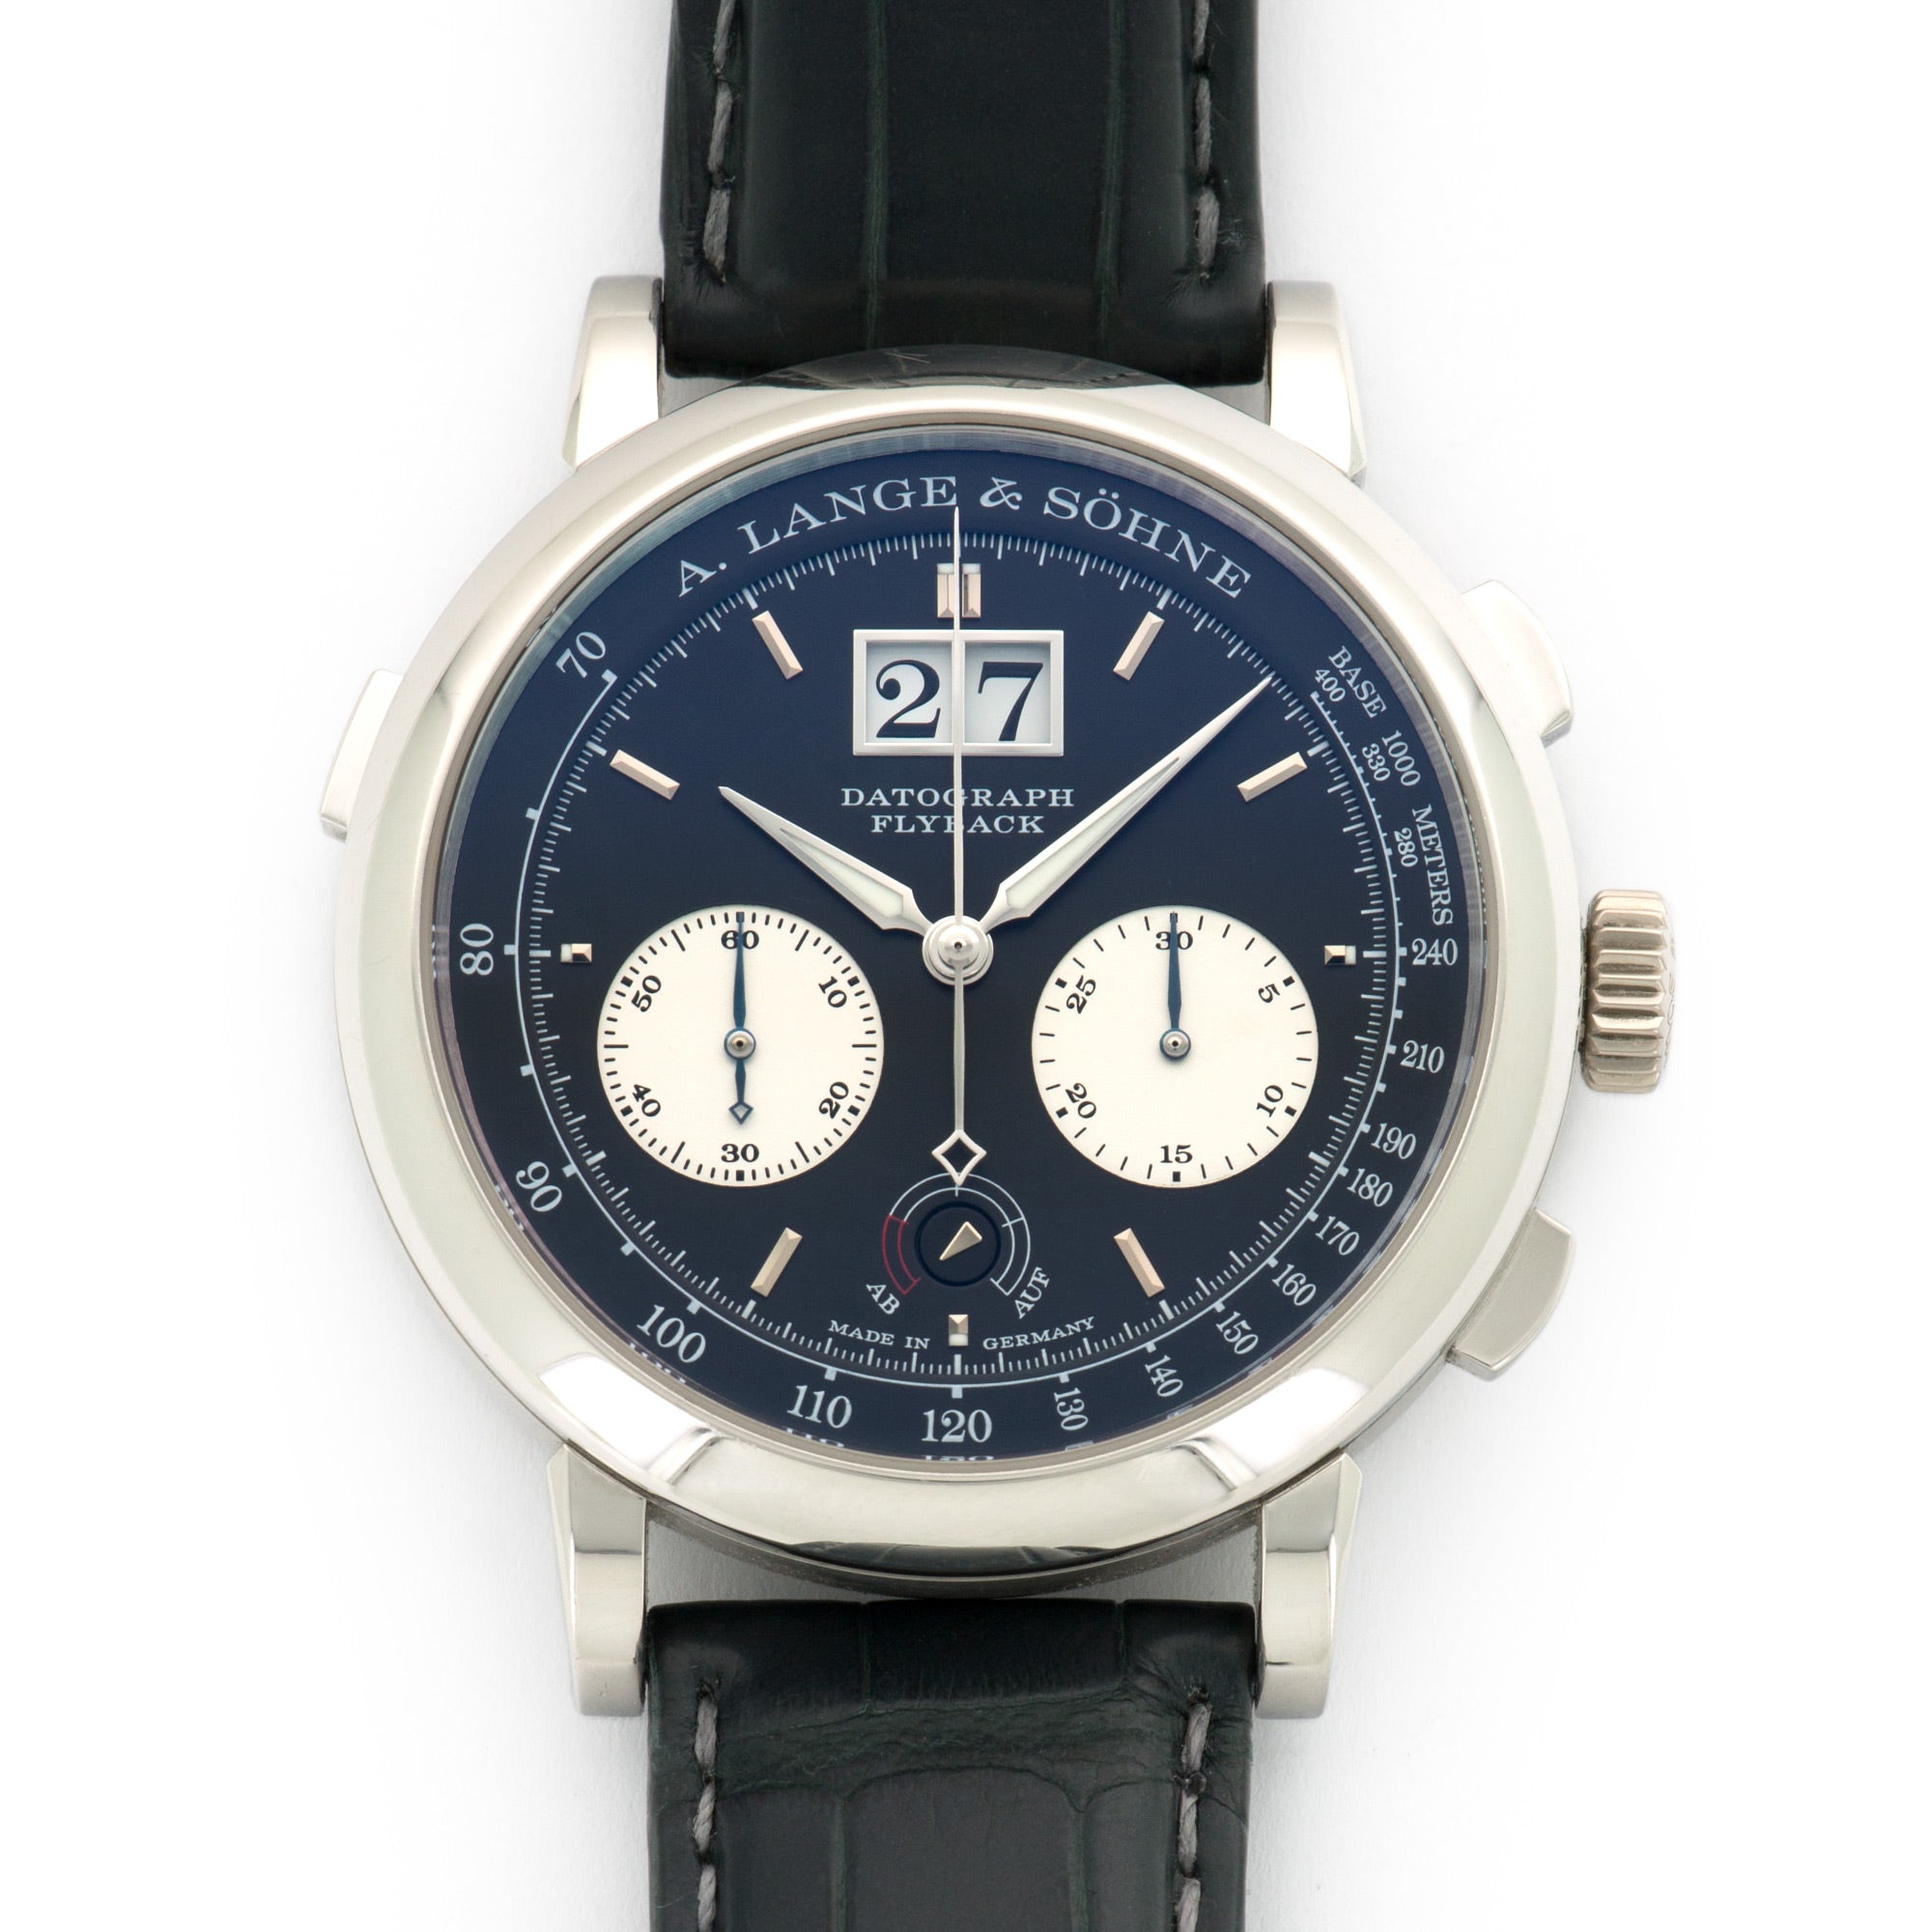 A. Lange & Sohne - A. Lange & Sohne Platinum Datograph Up/Down Watch Ref. 405.035 - The Keystone Watches